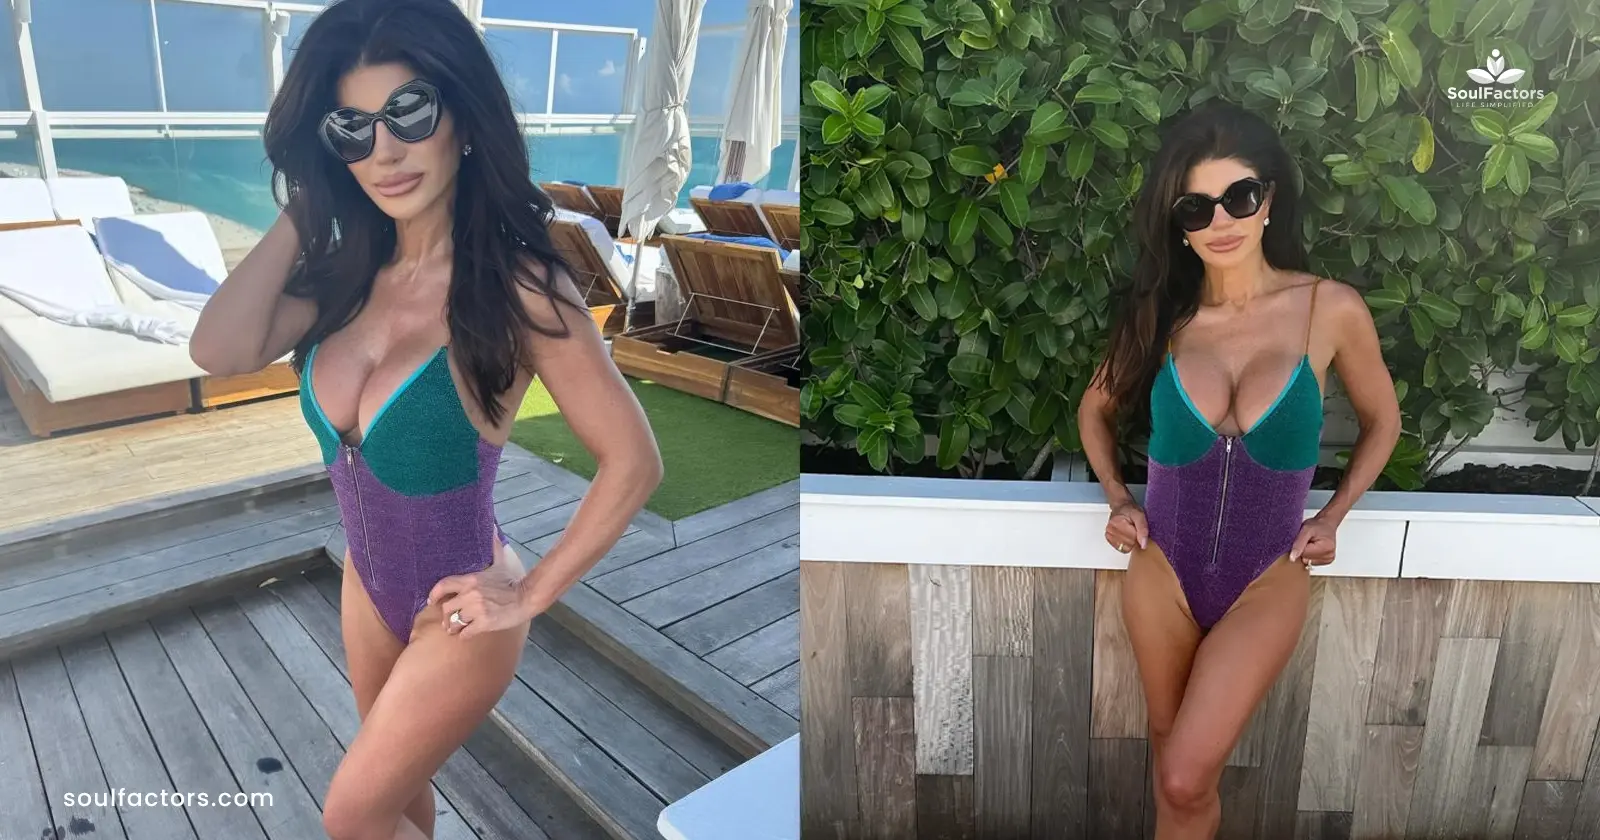 Teresa Giudice Turns Up The Heat In A Skimpy Swimsuit In Miami 